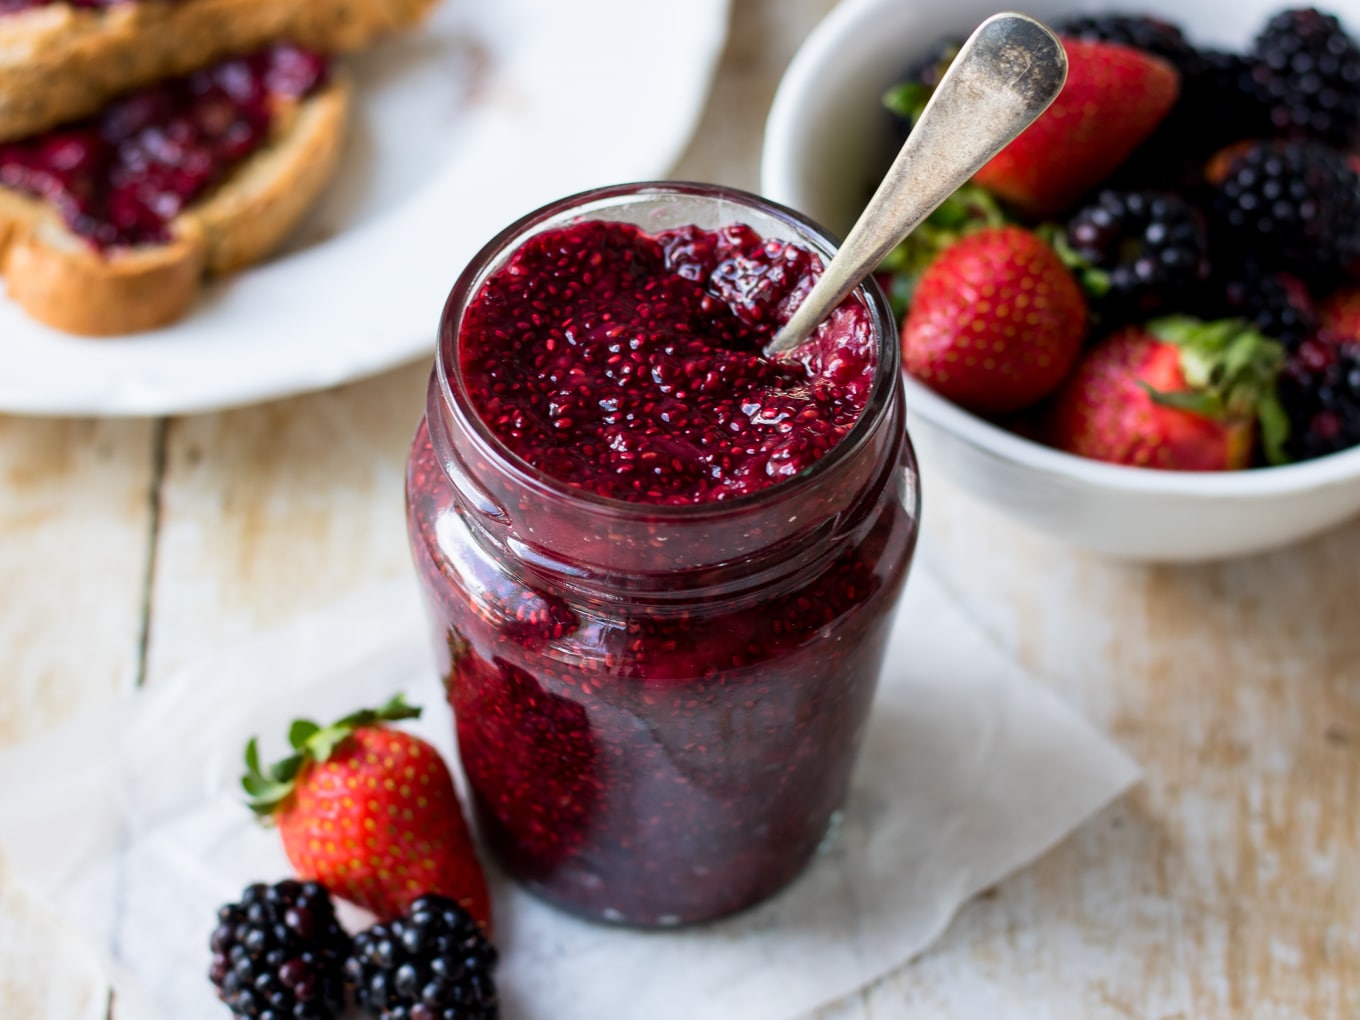 Image of dark berry chia jam in small curved jar, copper spoon in the jar, berries in background